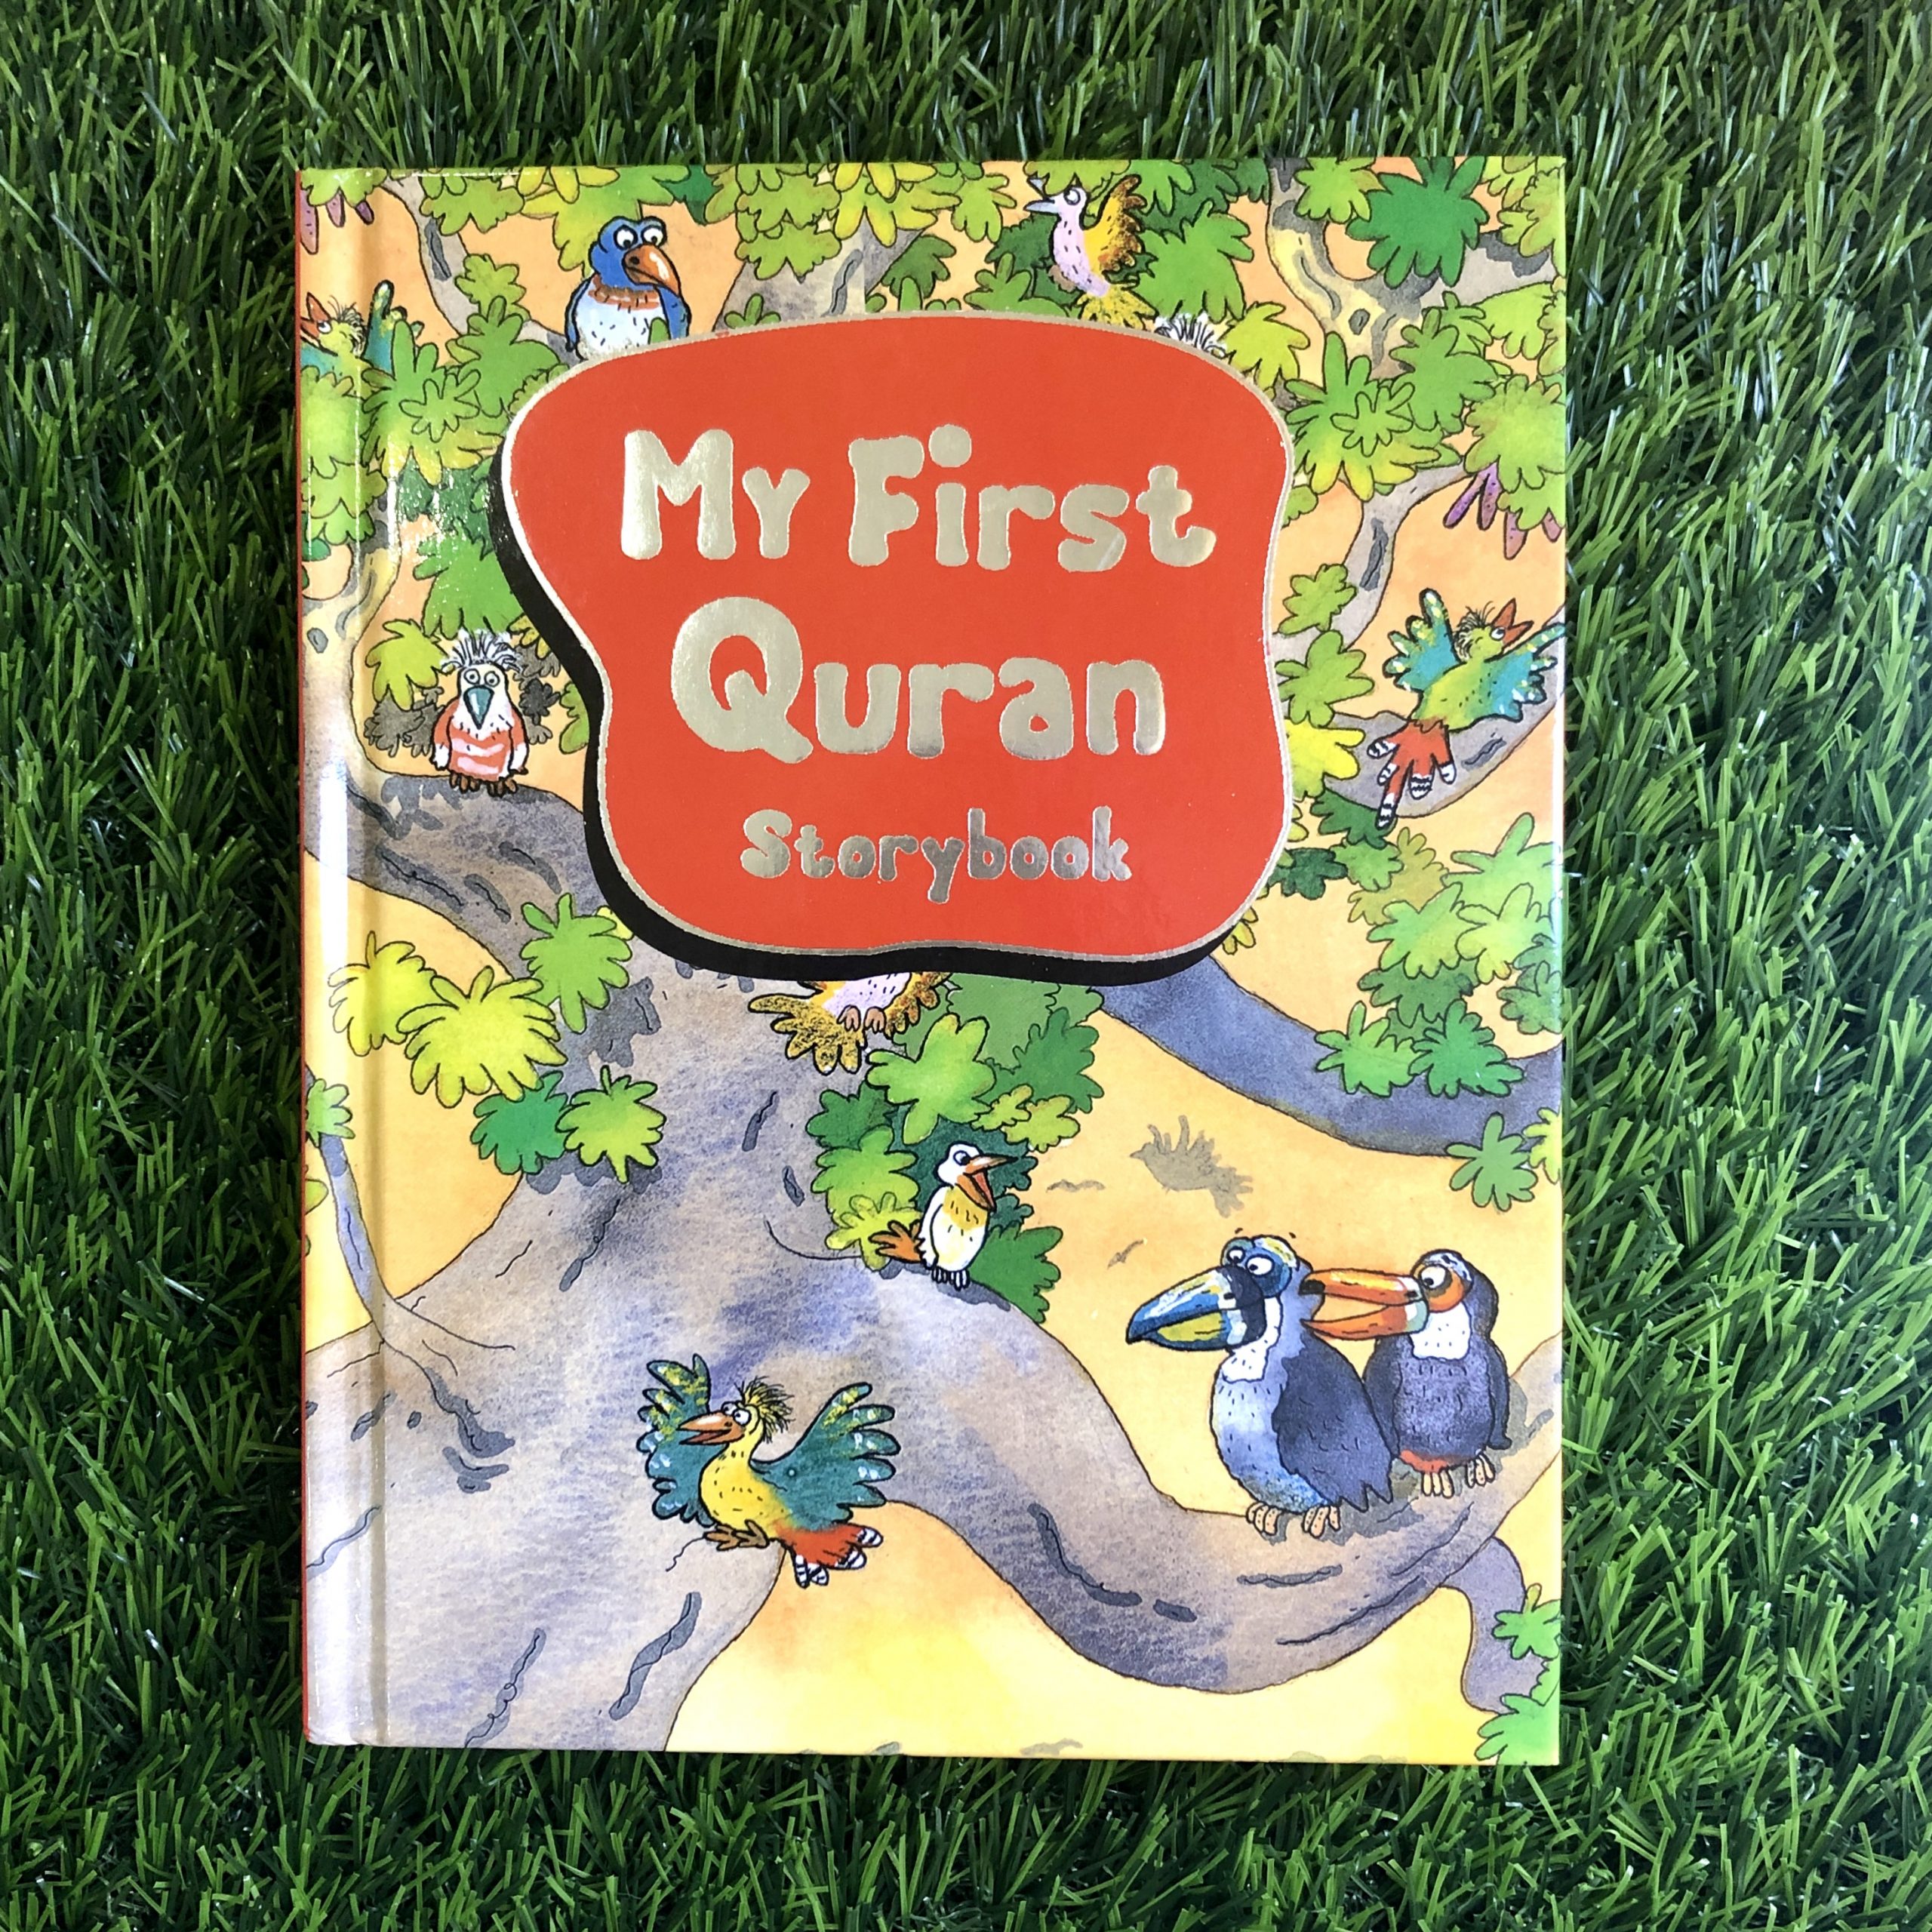 MY FIRST QURAN STORYBOOK – Muslim Converts' Association of Singapore